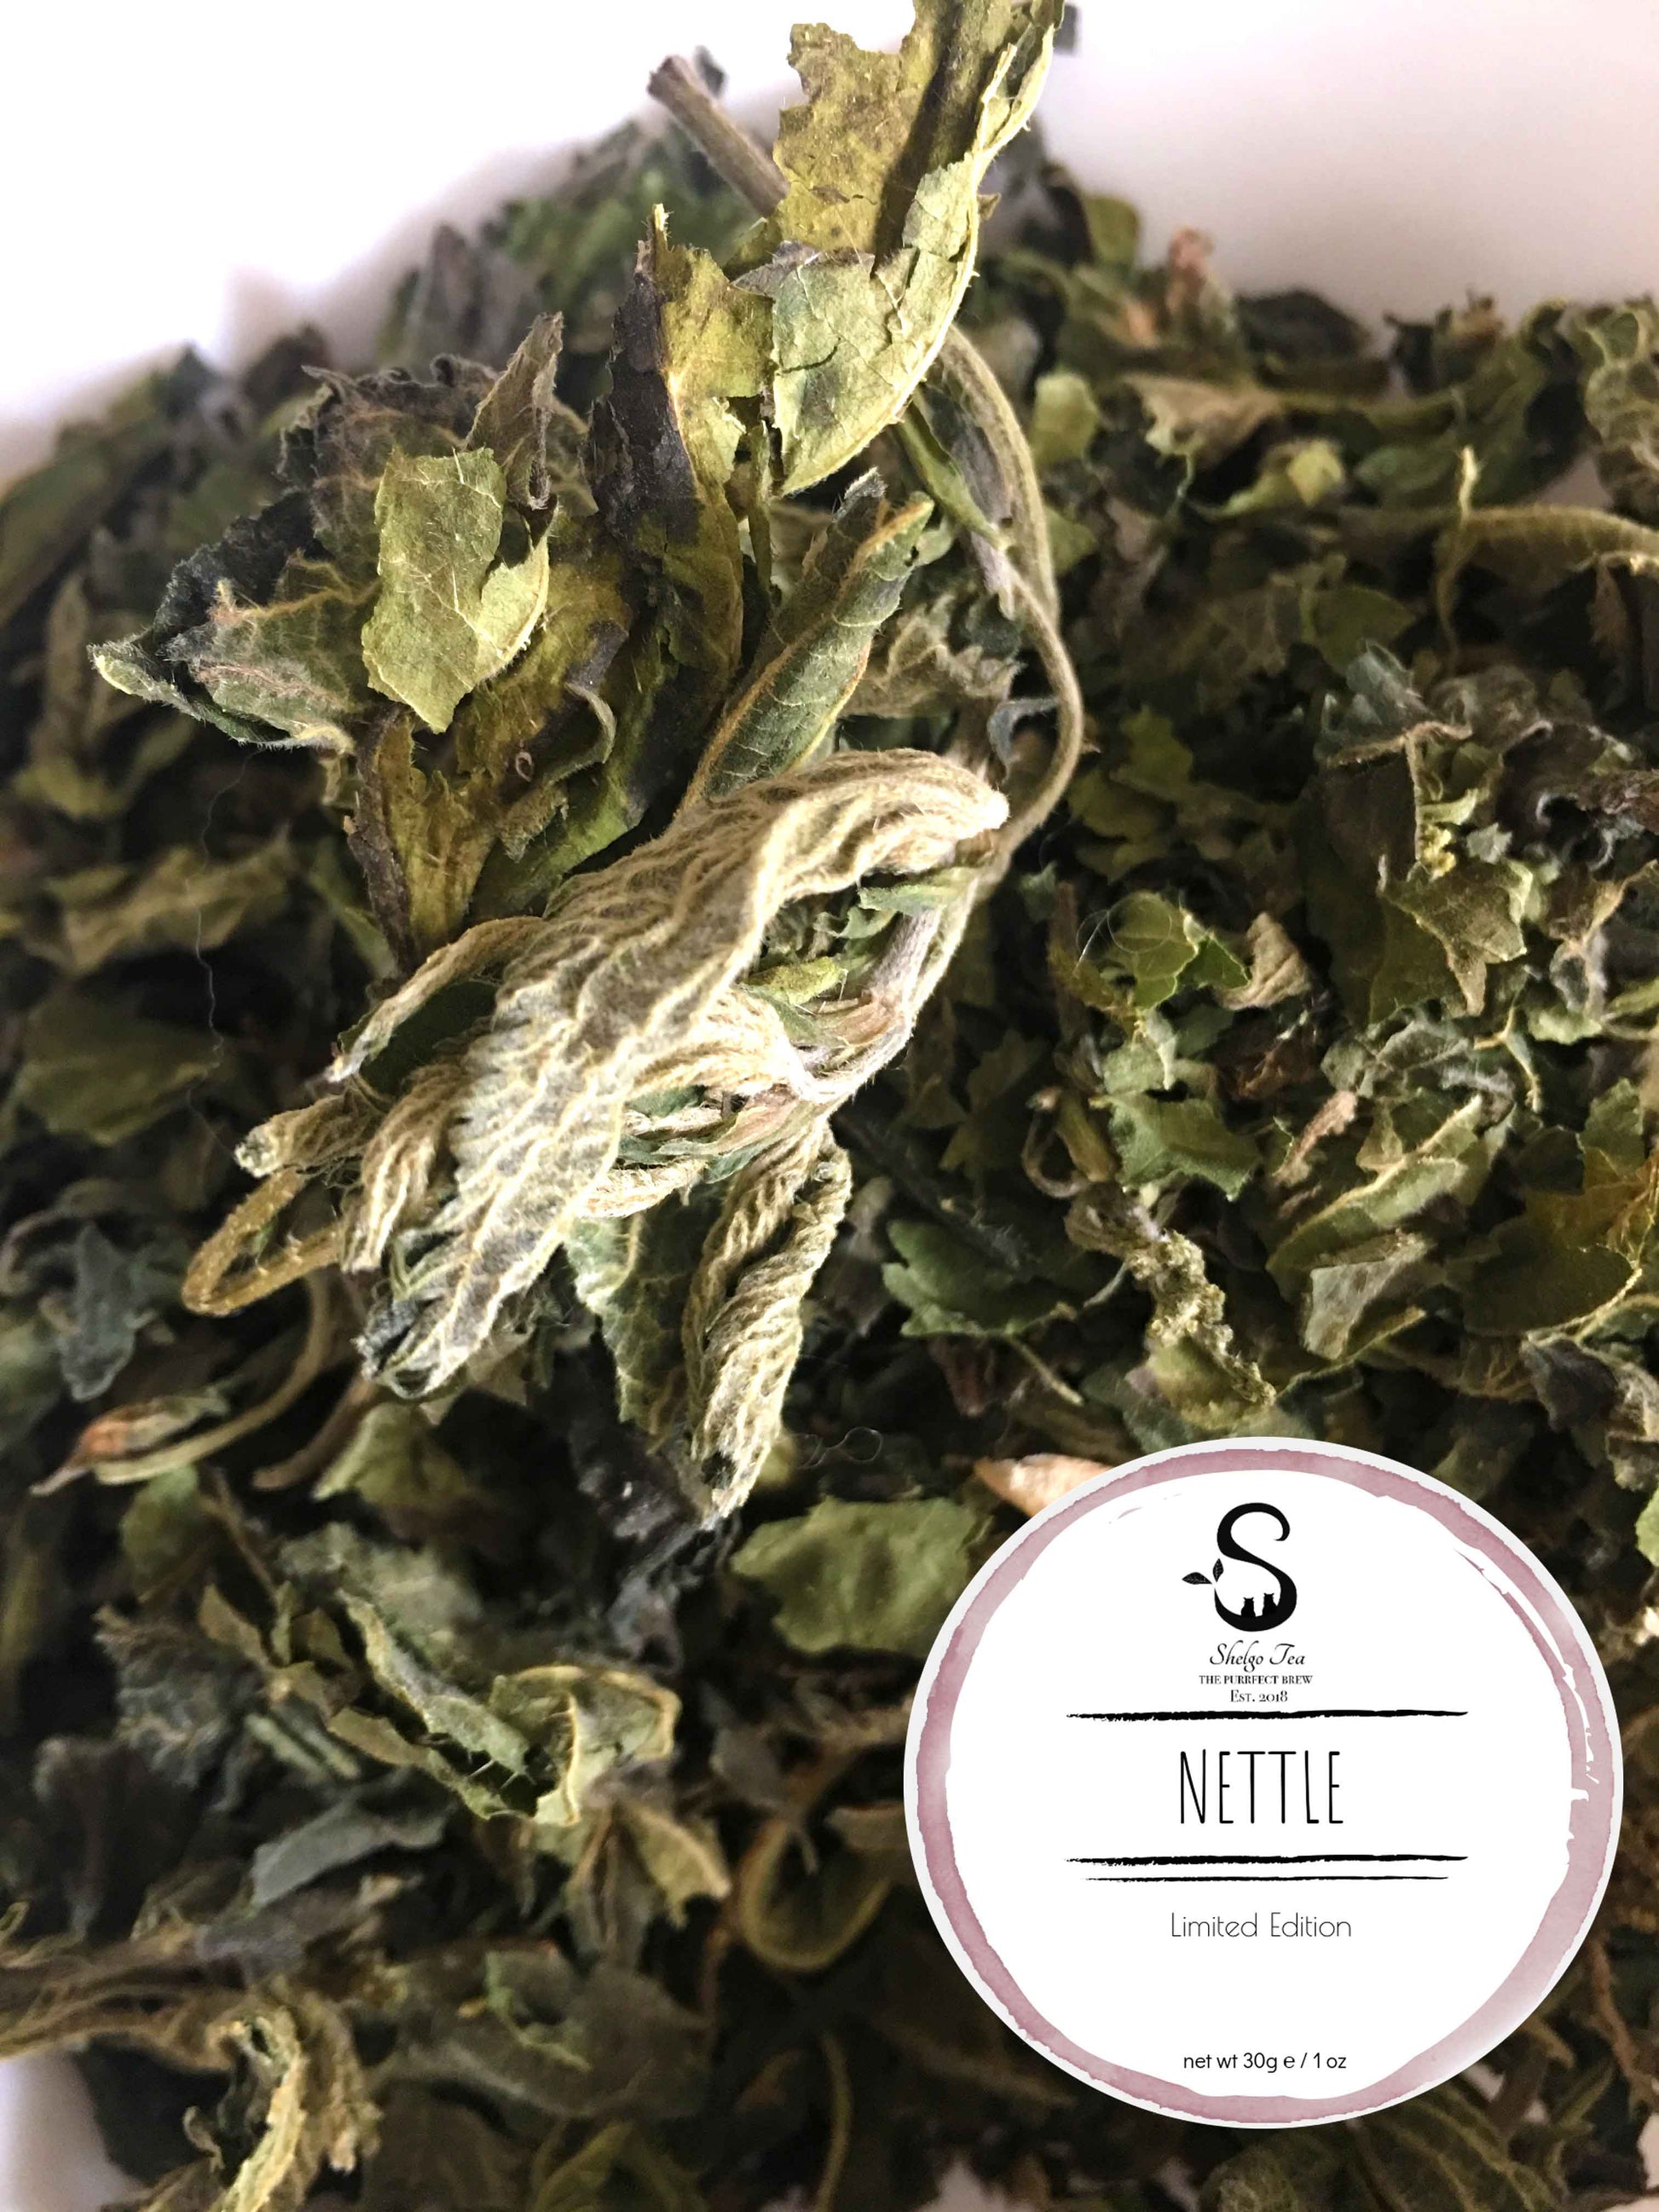 Can nettle tea be used to aid with weight loss.